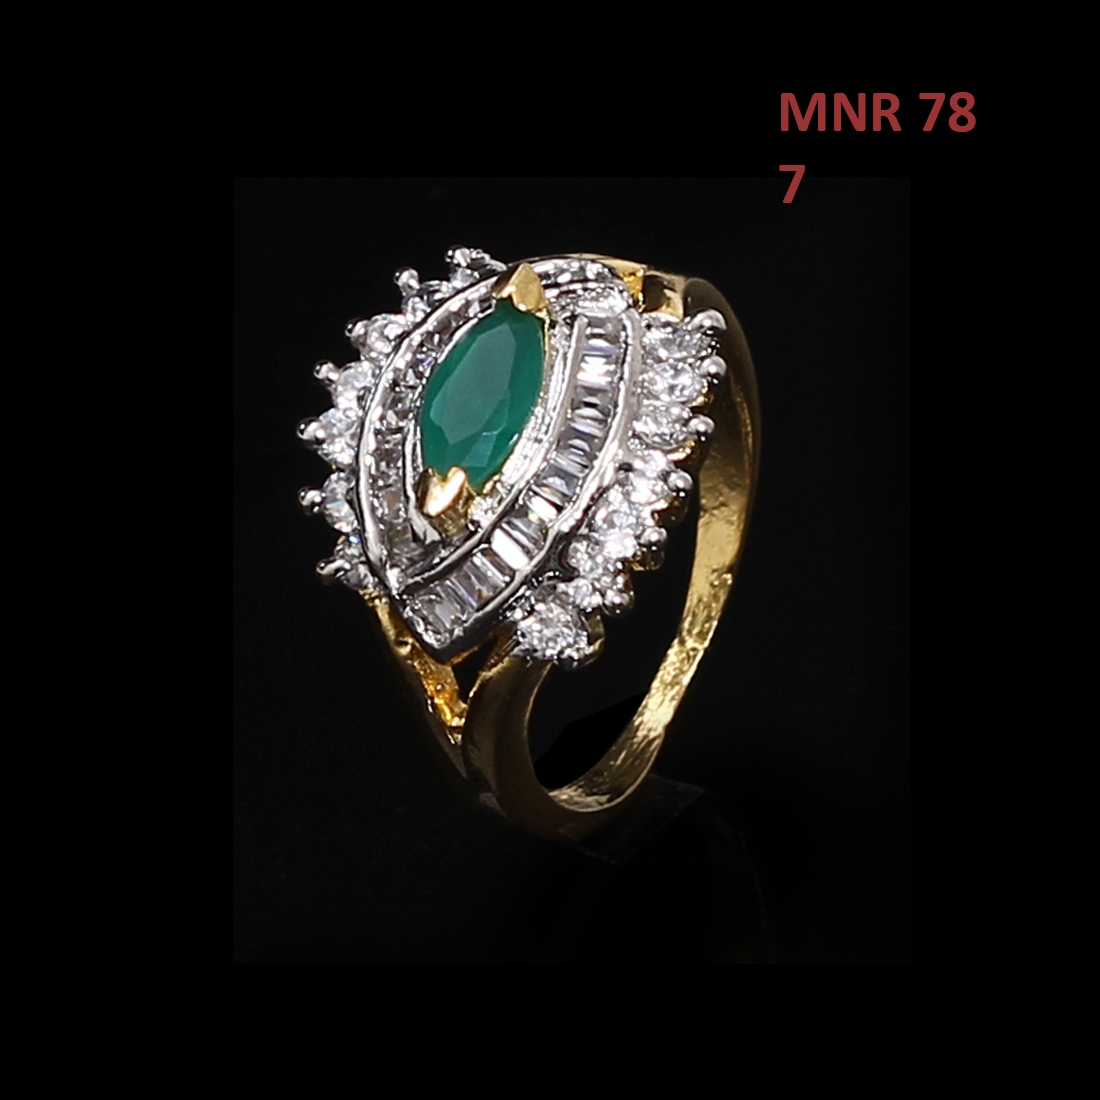 55Carat | Latest Design Ethnic Ring Pear Emerald,Cubic Zircon Green-White Intricately Handcrafted In 18K Gold Plated Designer Jewellery For Girls Ladies Women Mnr 78-Green